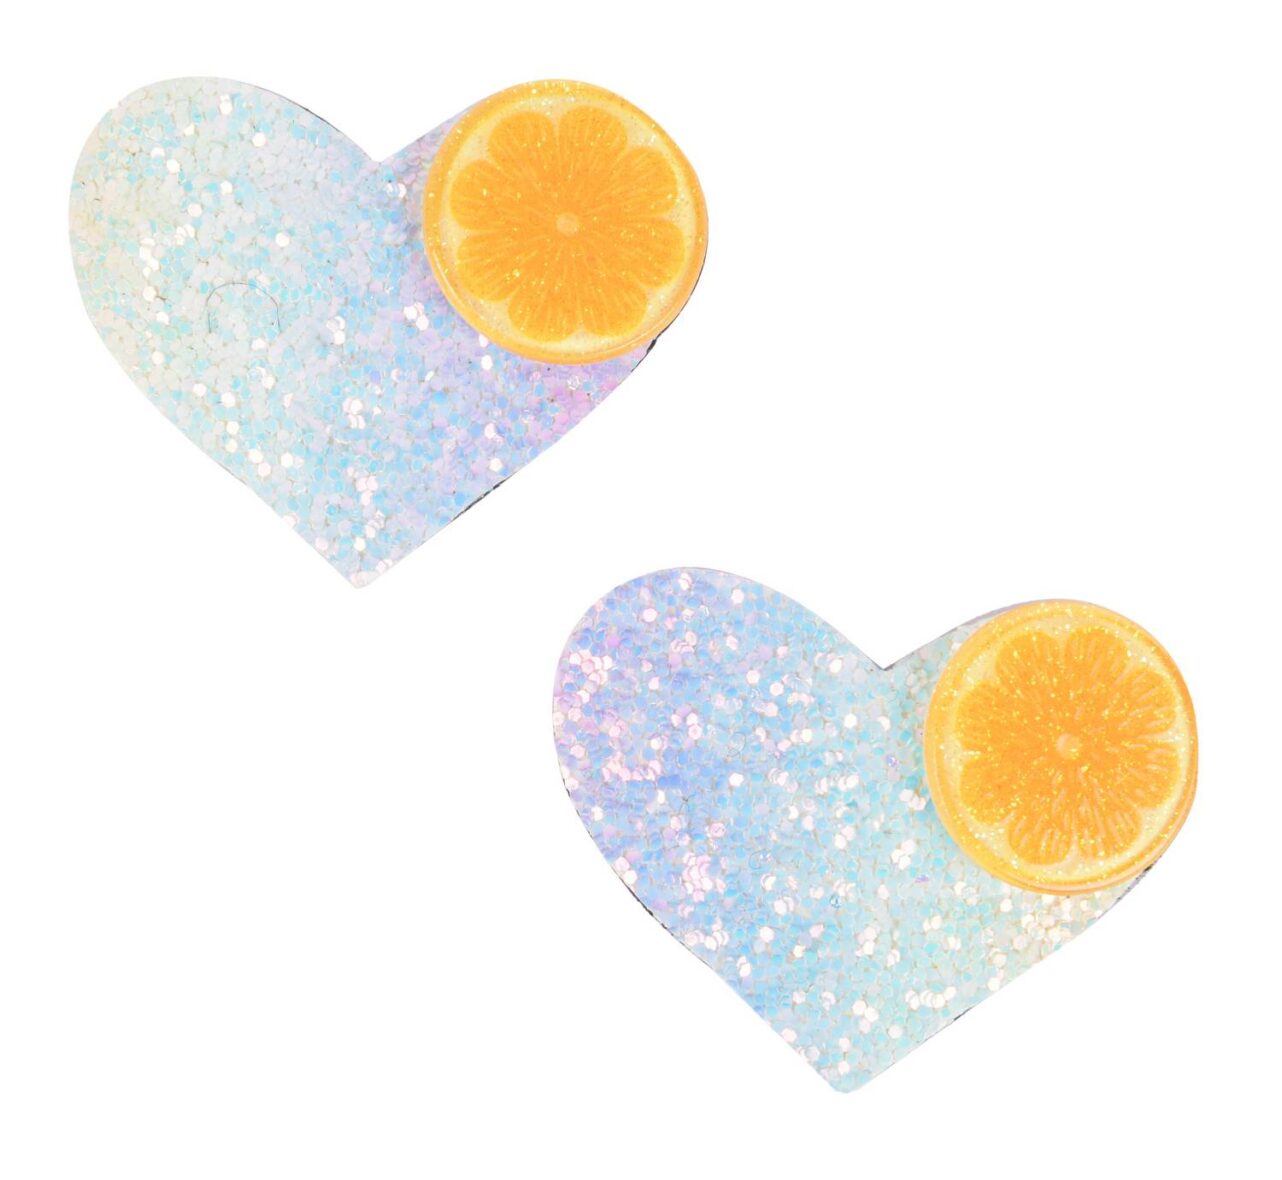 Yellow Bee Heart Shape Glittery Hair Pins with Fruits(1 Pair), Multicolor